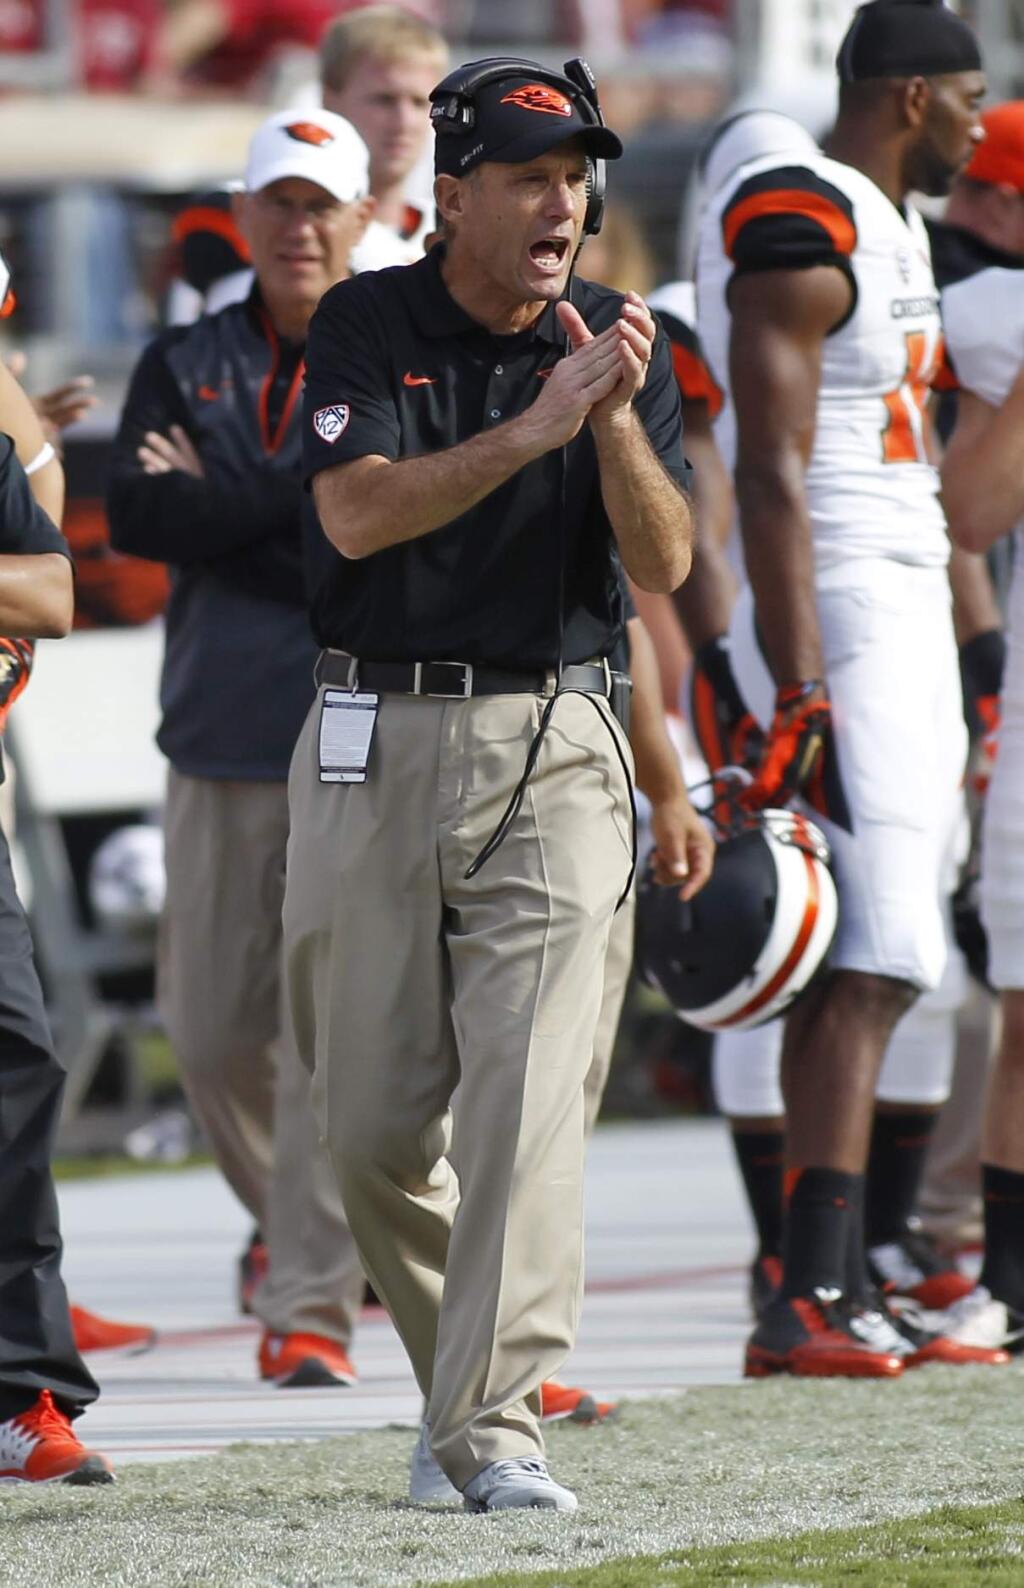 Oregon State head coach Mike Riley claps his hands during the second half of an NCAA college football game against Stanford, Saturday, Oct. 25, 2014, in Stanford, Calif. (AP Photo/George Nikitin)